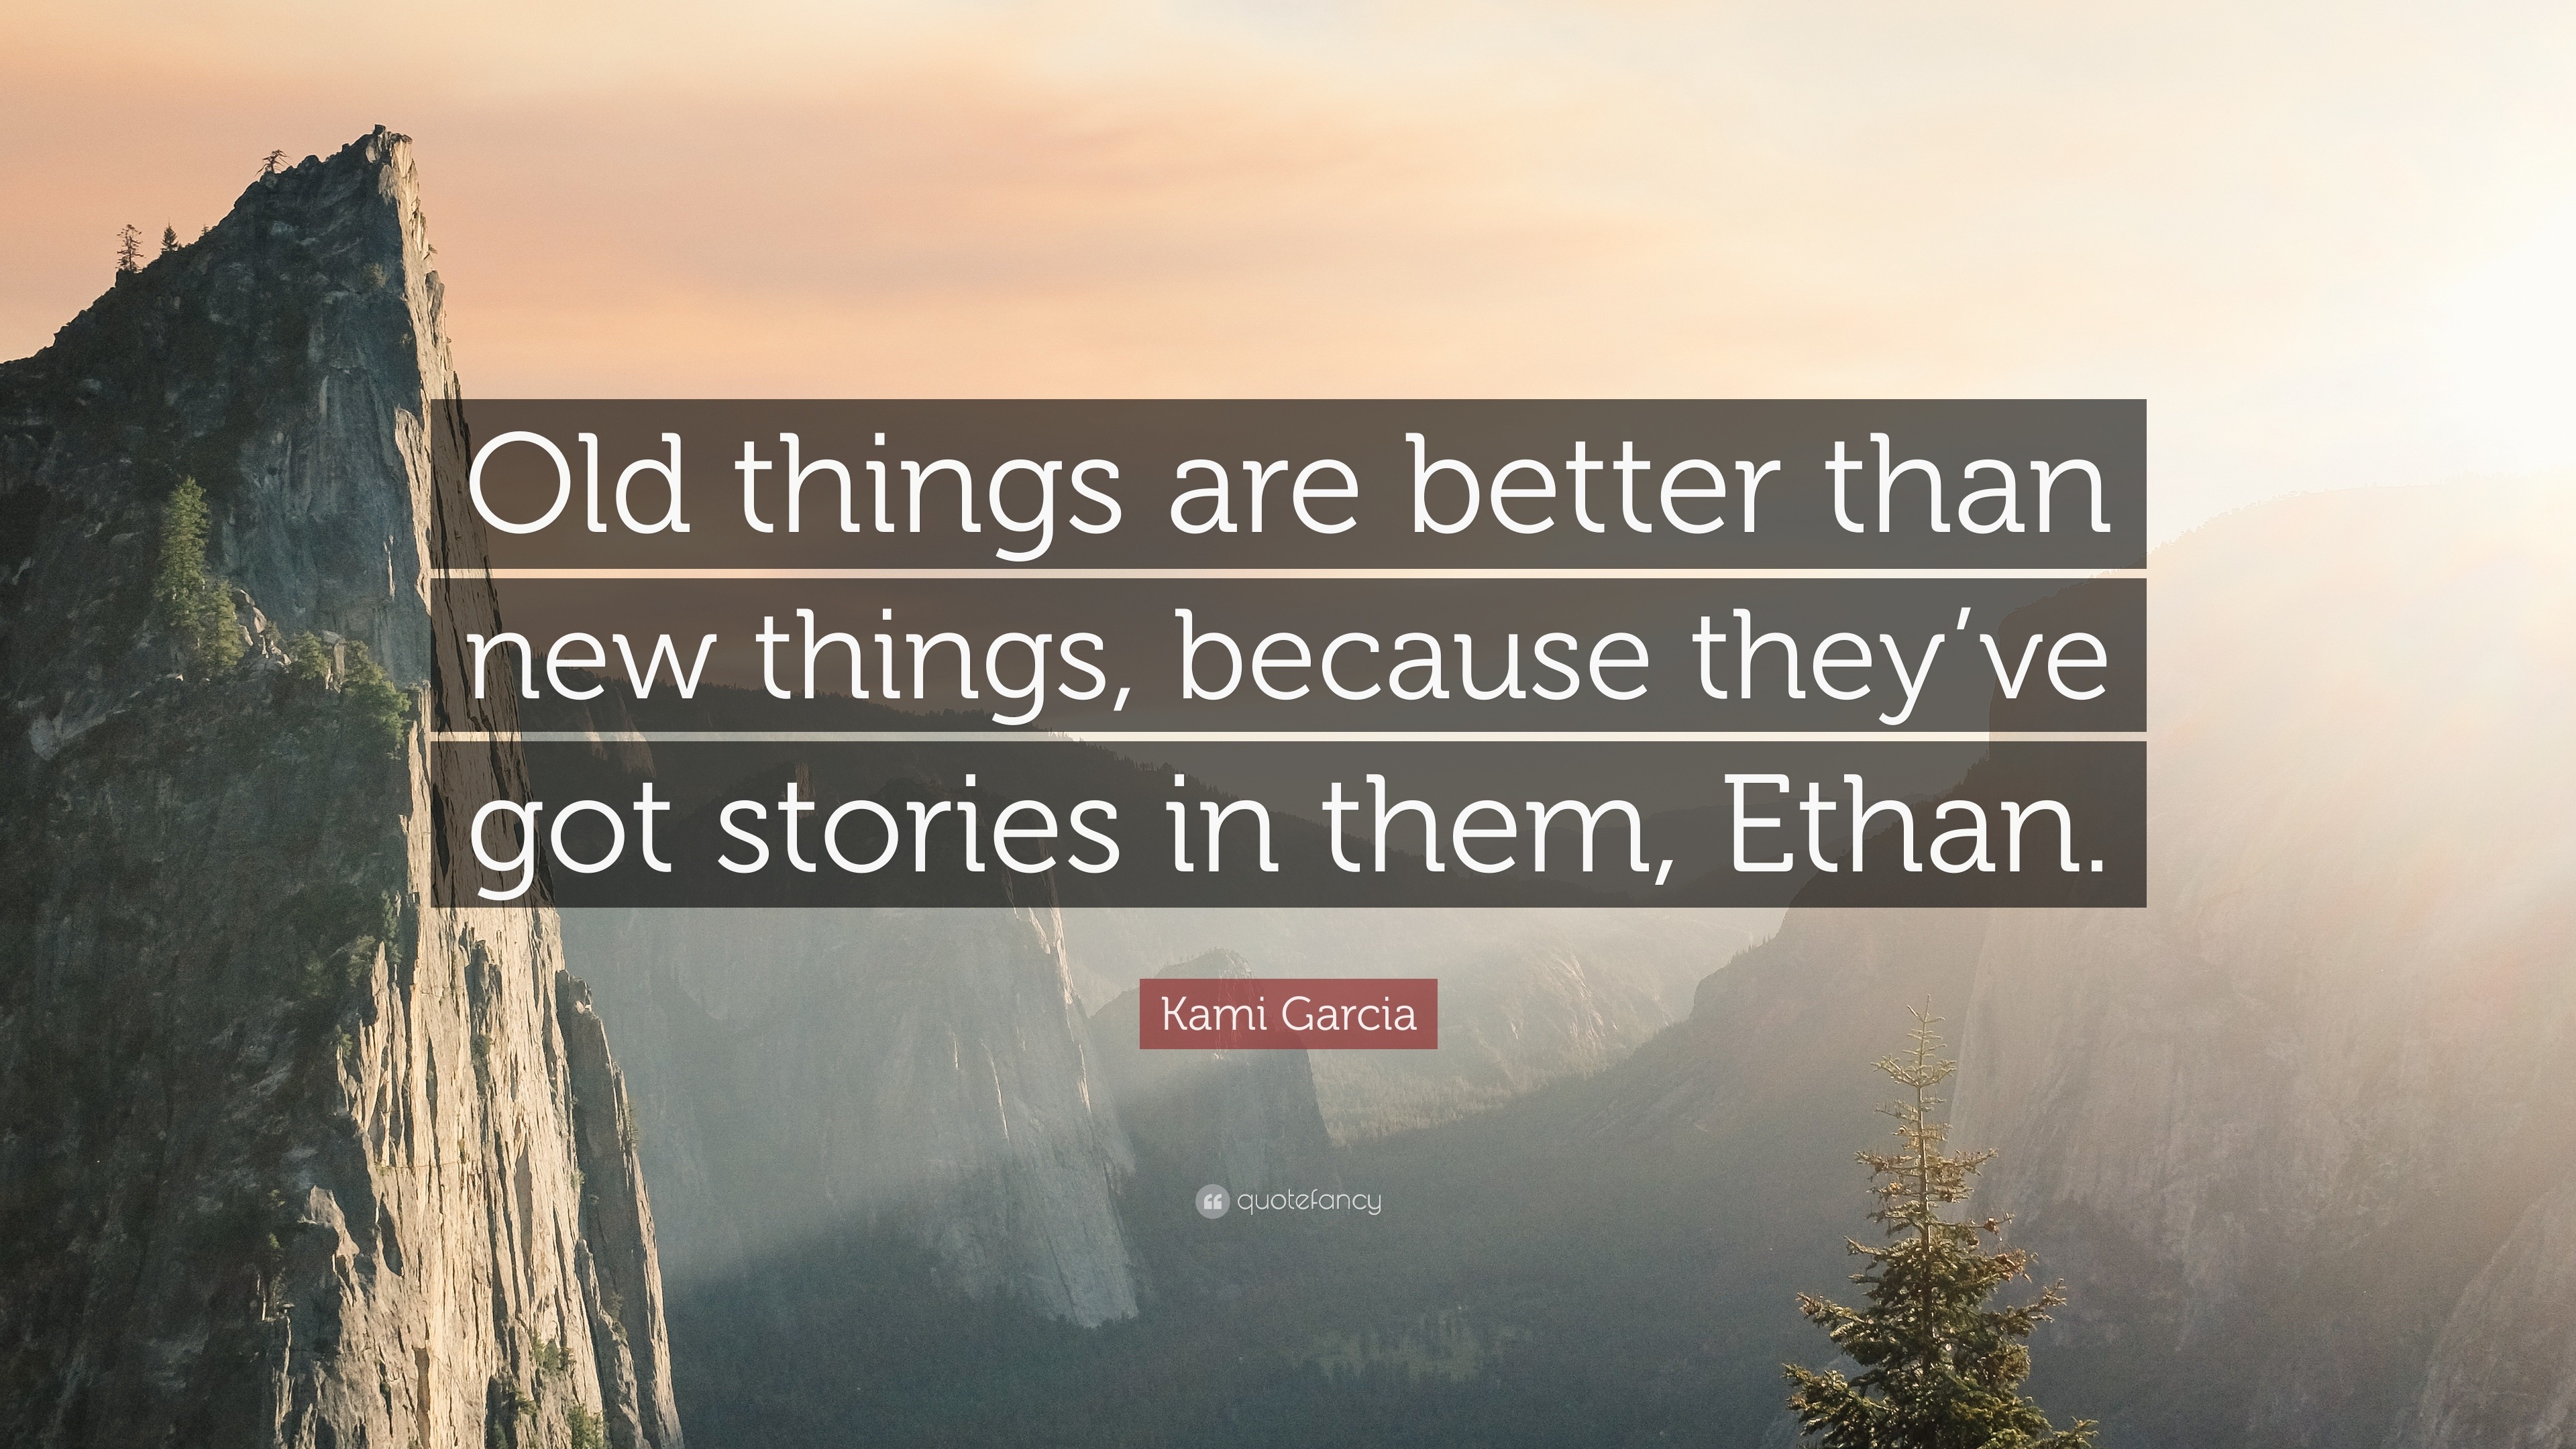 Kami Garcia Quote: “Old Things Are Better Than New Things, Because They've Got Stories In